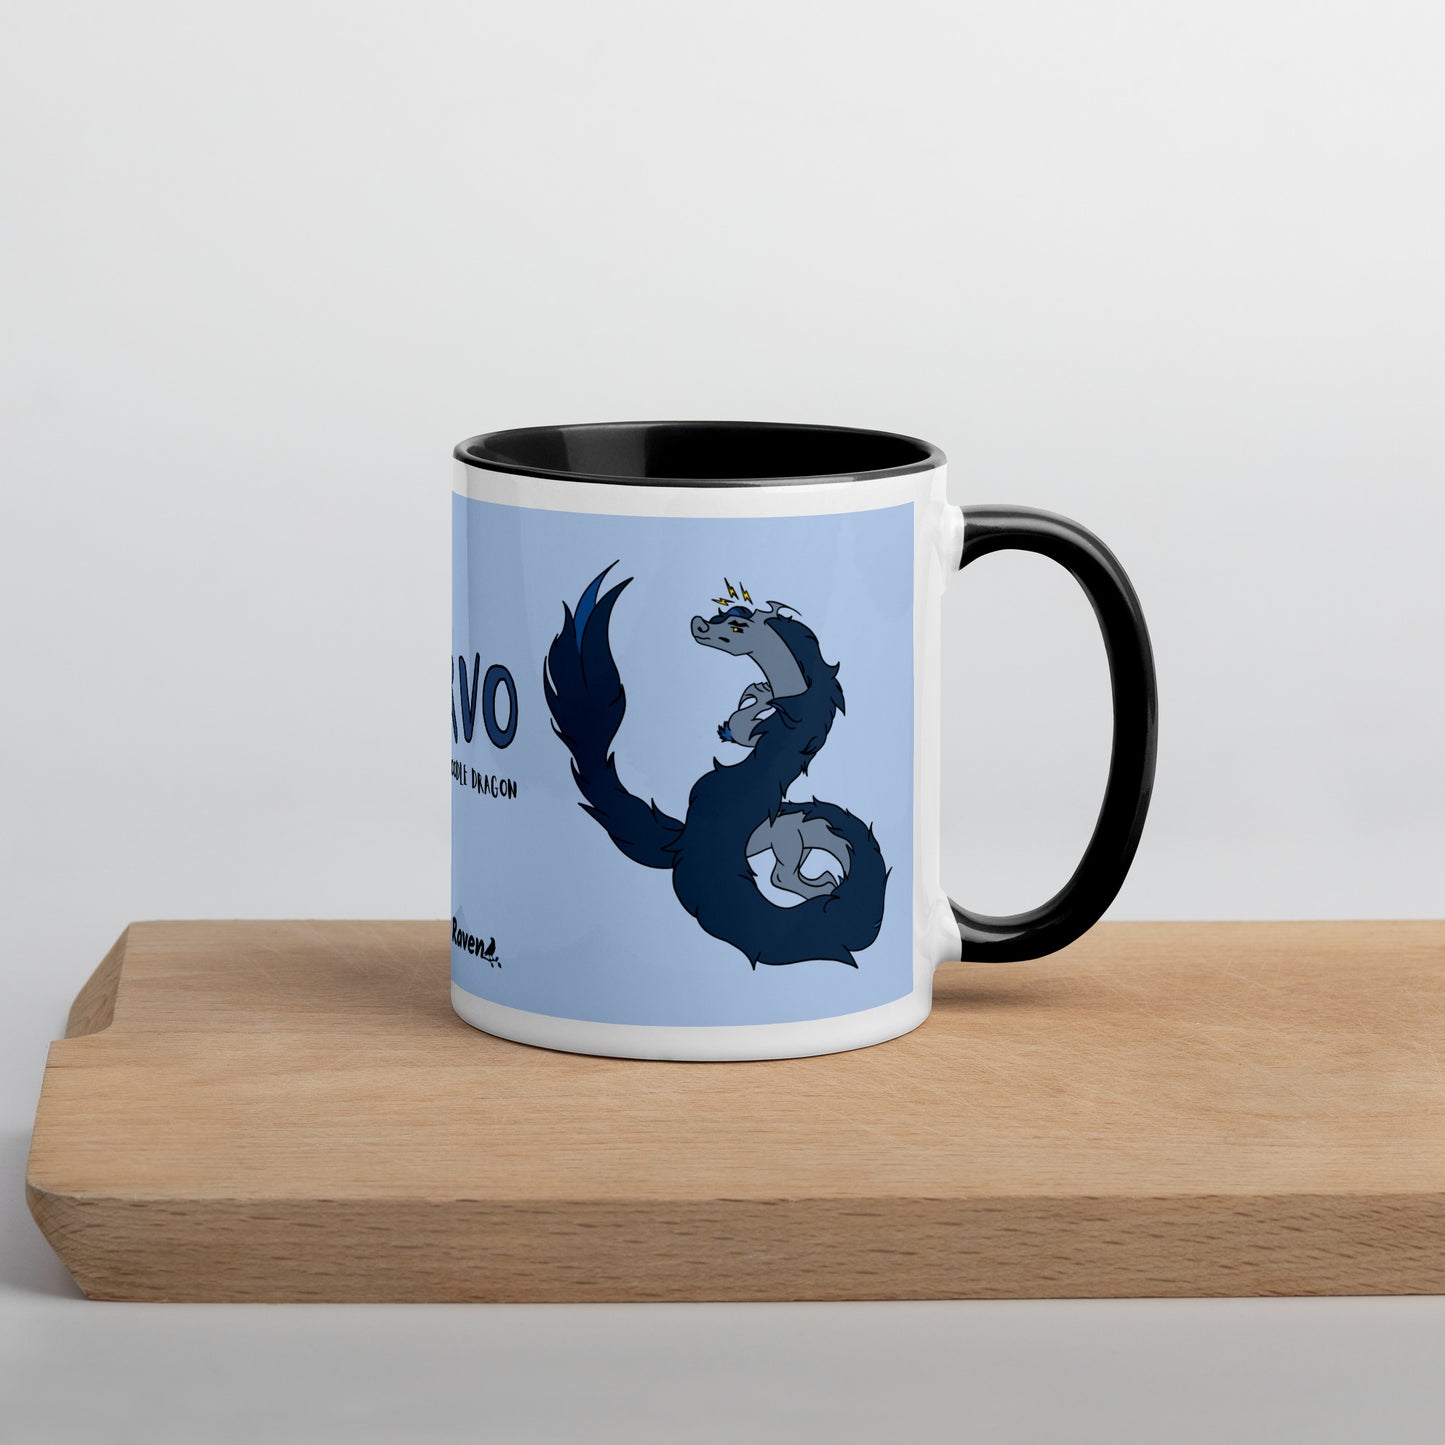 11 ounce ceramic mug featuring a double-sided image of angry Korvo the Fuzzy Noodle dragon against a light blue background.  Black inside and handle. Sitting on serving board with handle facing right.